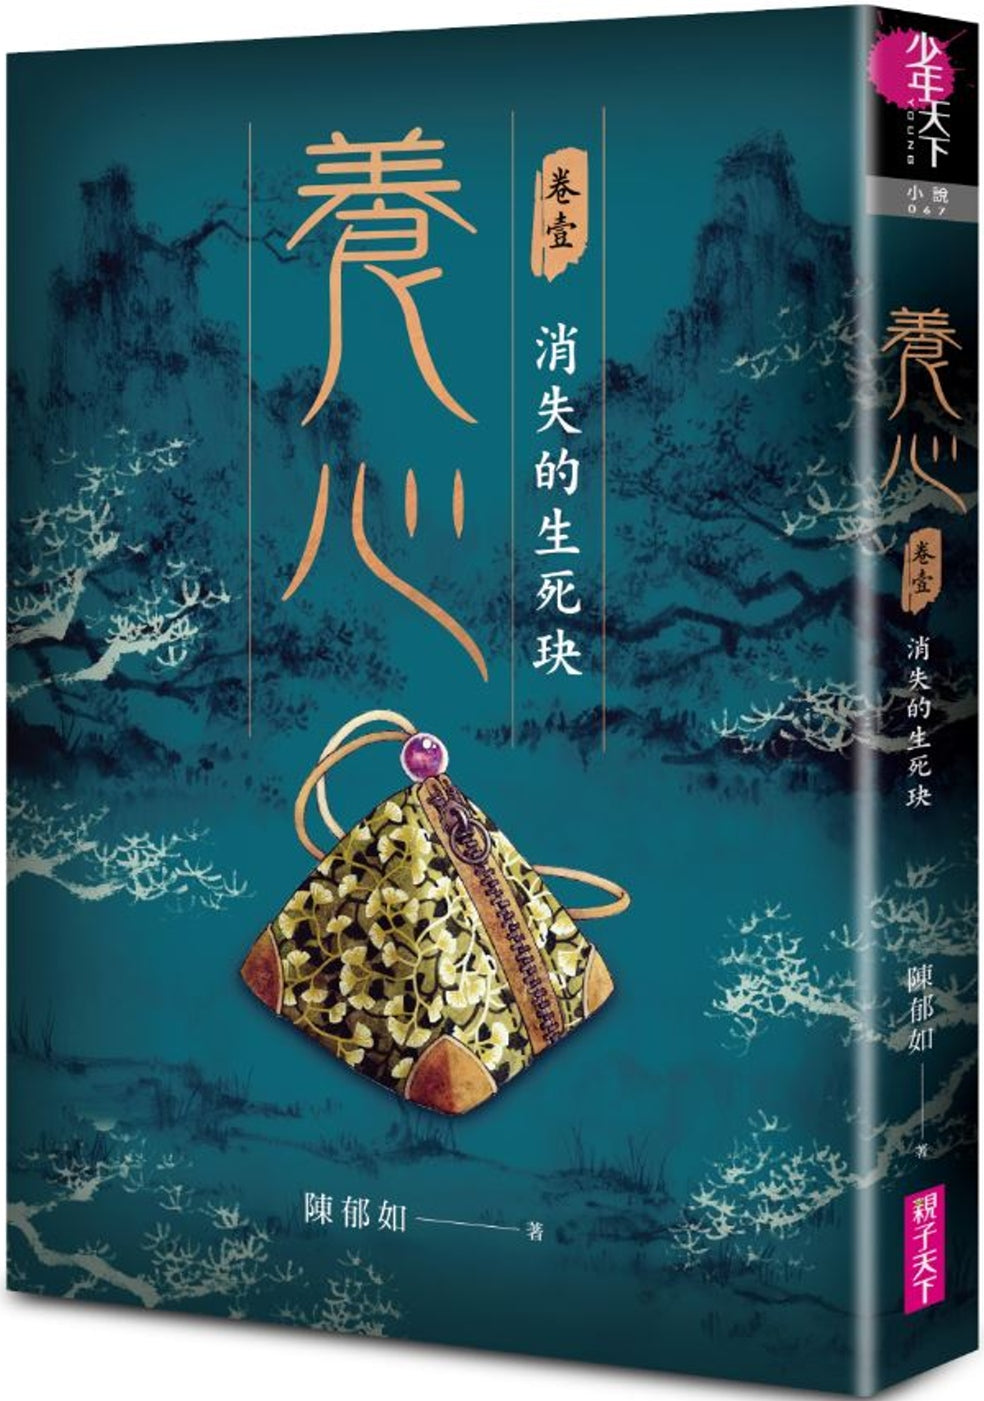 Nurturing the Heart 1: The Disappearance of the Jade of Mortality • 養心1：消失的生死玦